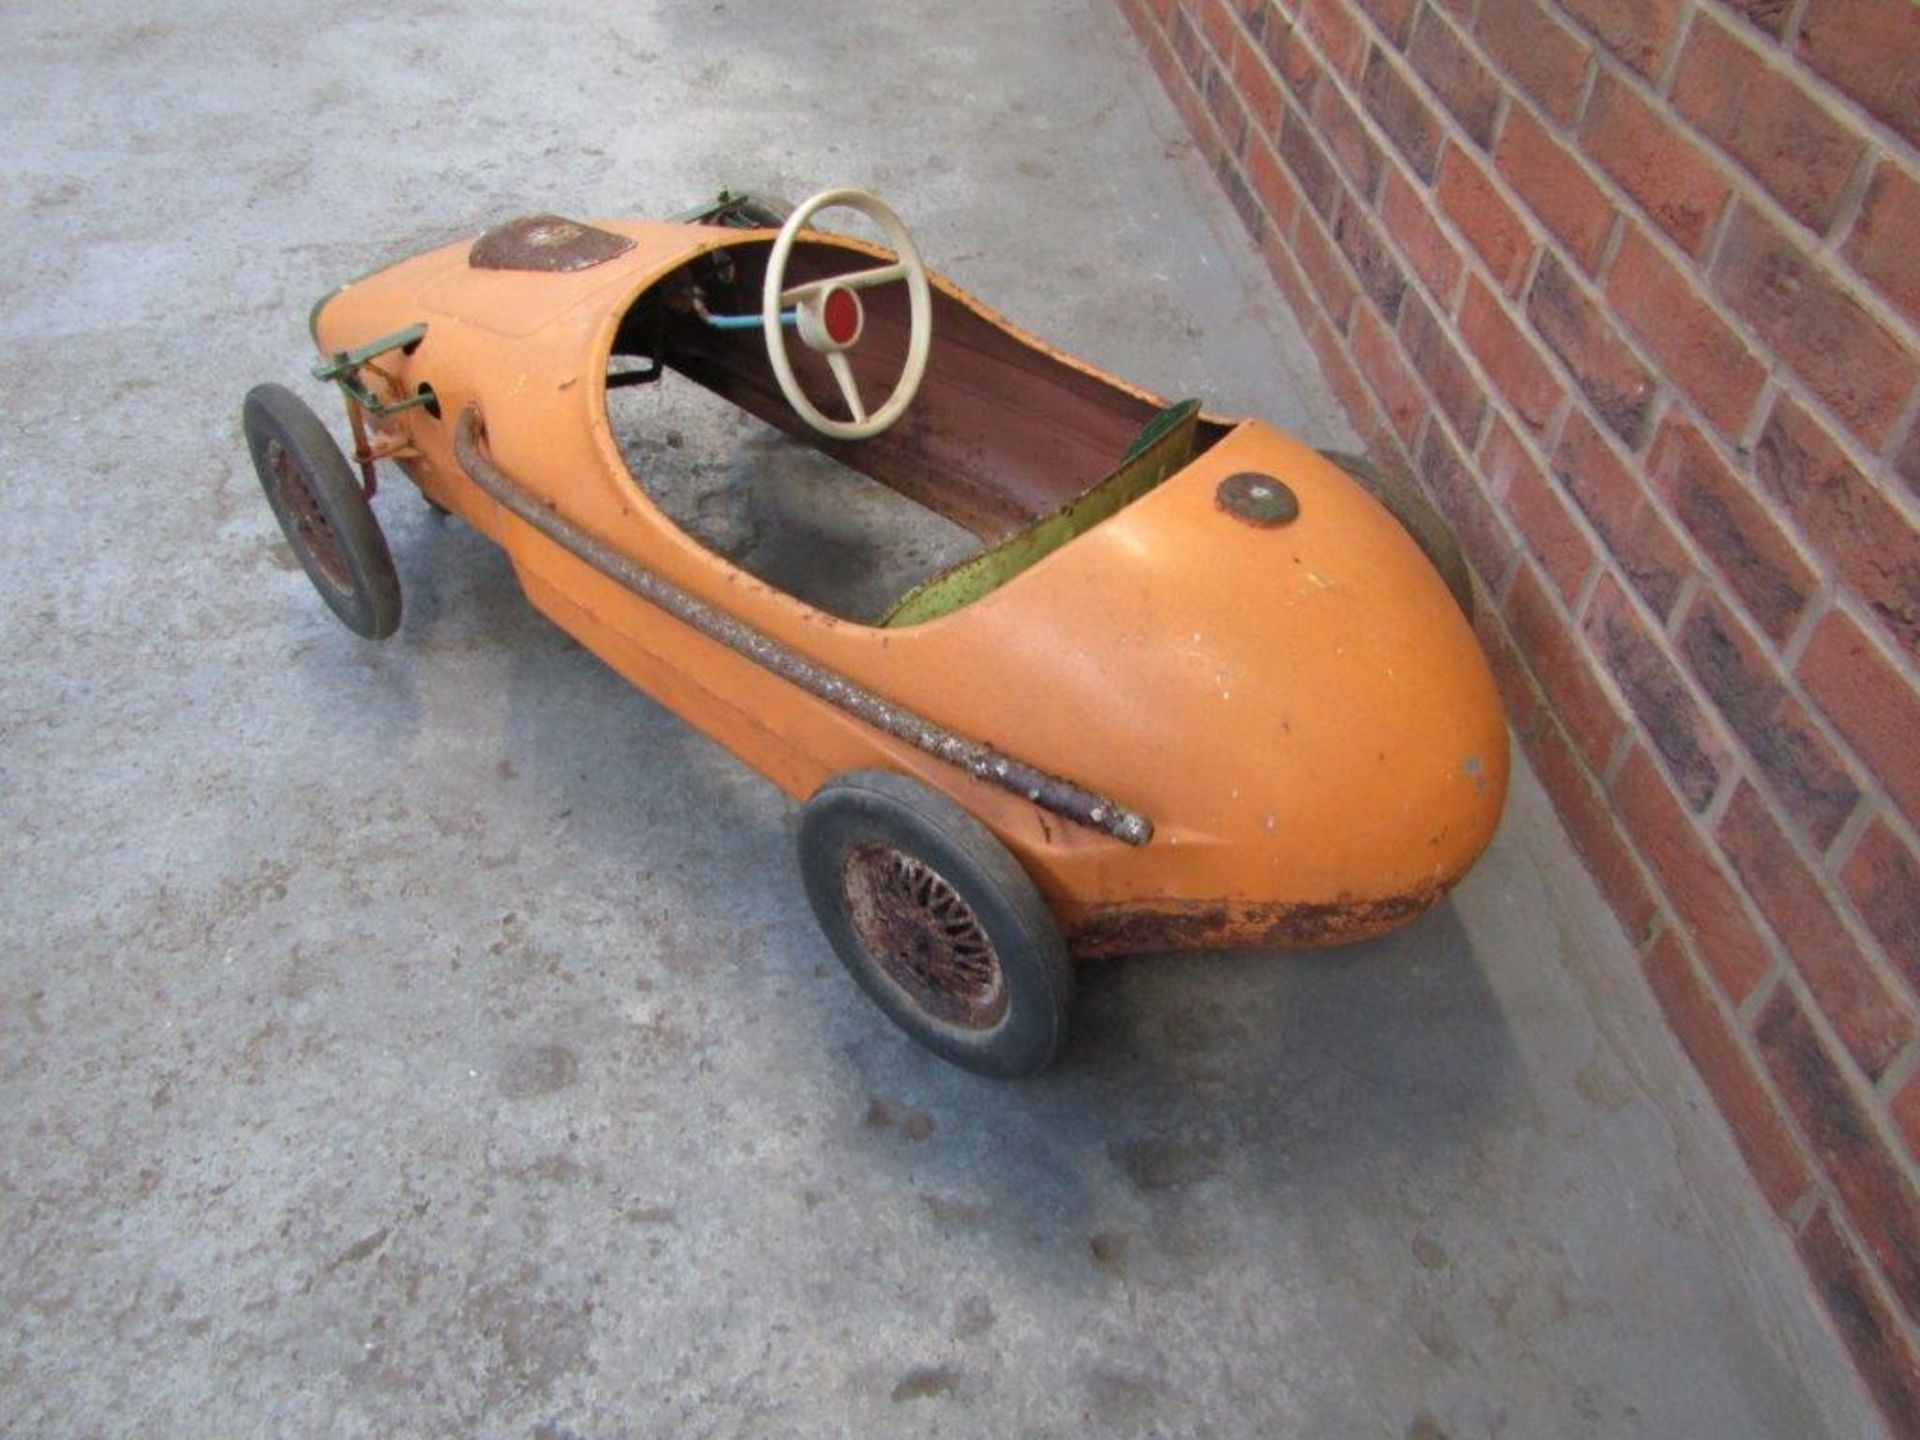 Vintage Triang Childs Racing Pedal Car - Image 4 of 5